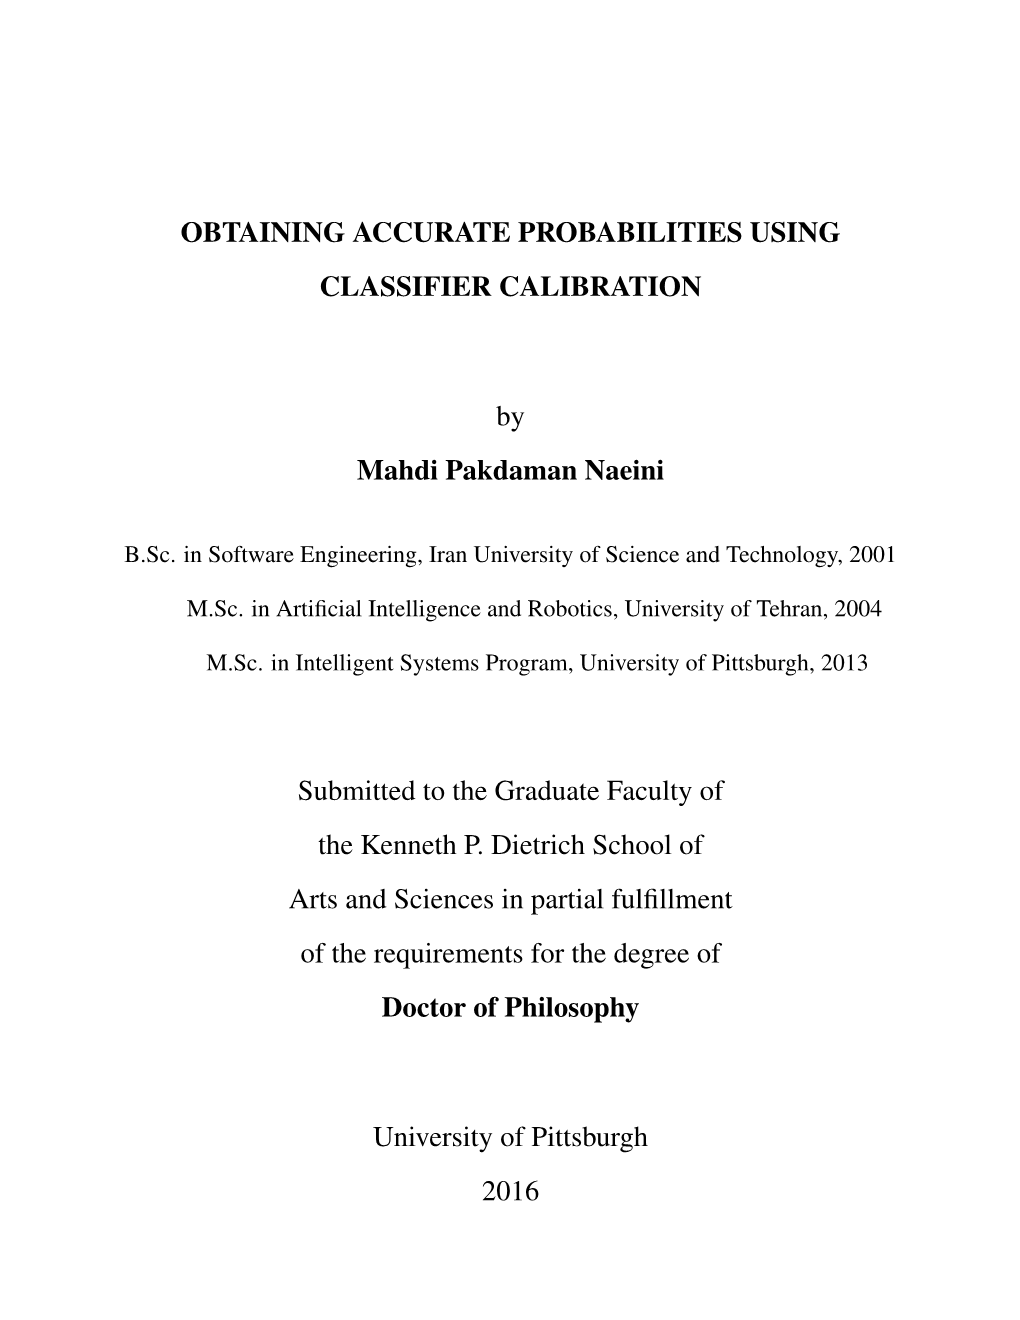 Obtaining Accurate Probabilities Using Classifier Calibration